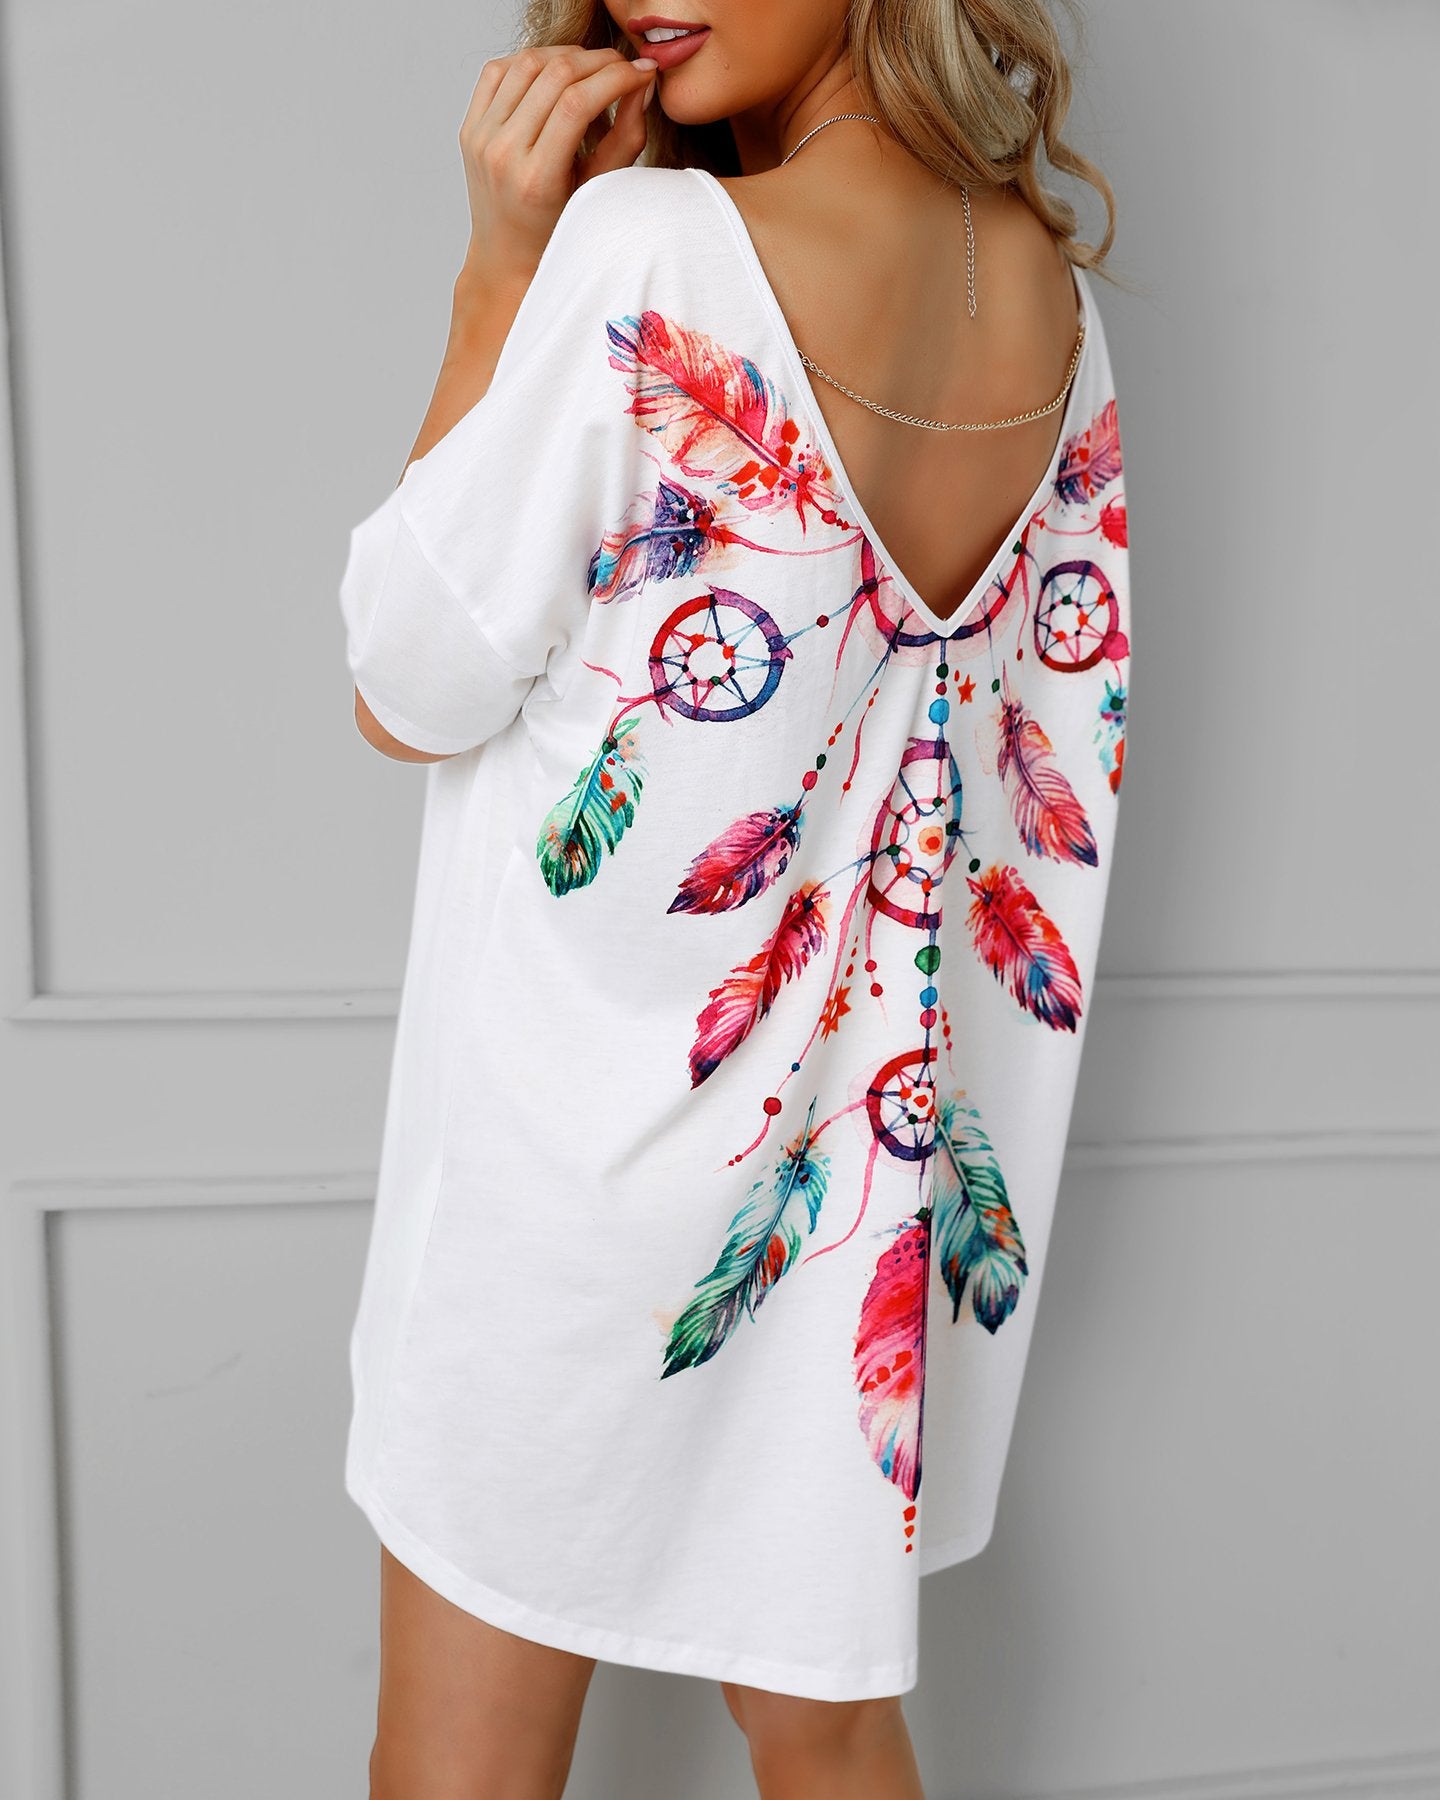 Outlet26 Feather Print Open Back Casual Blouse white